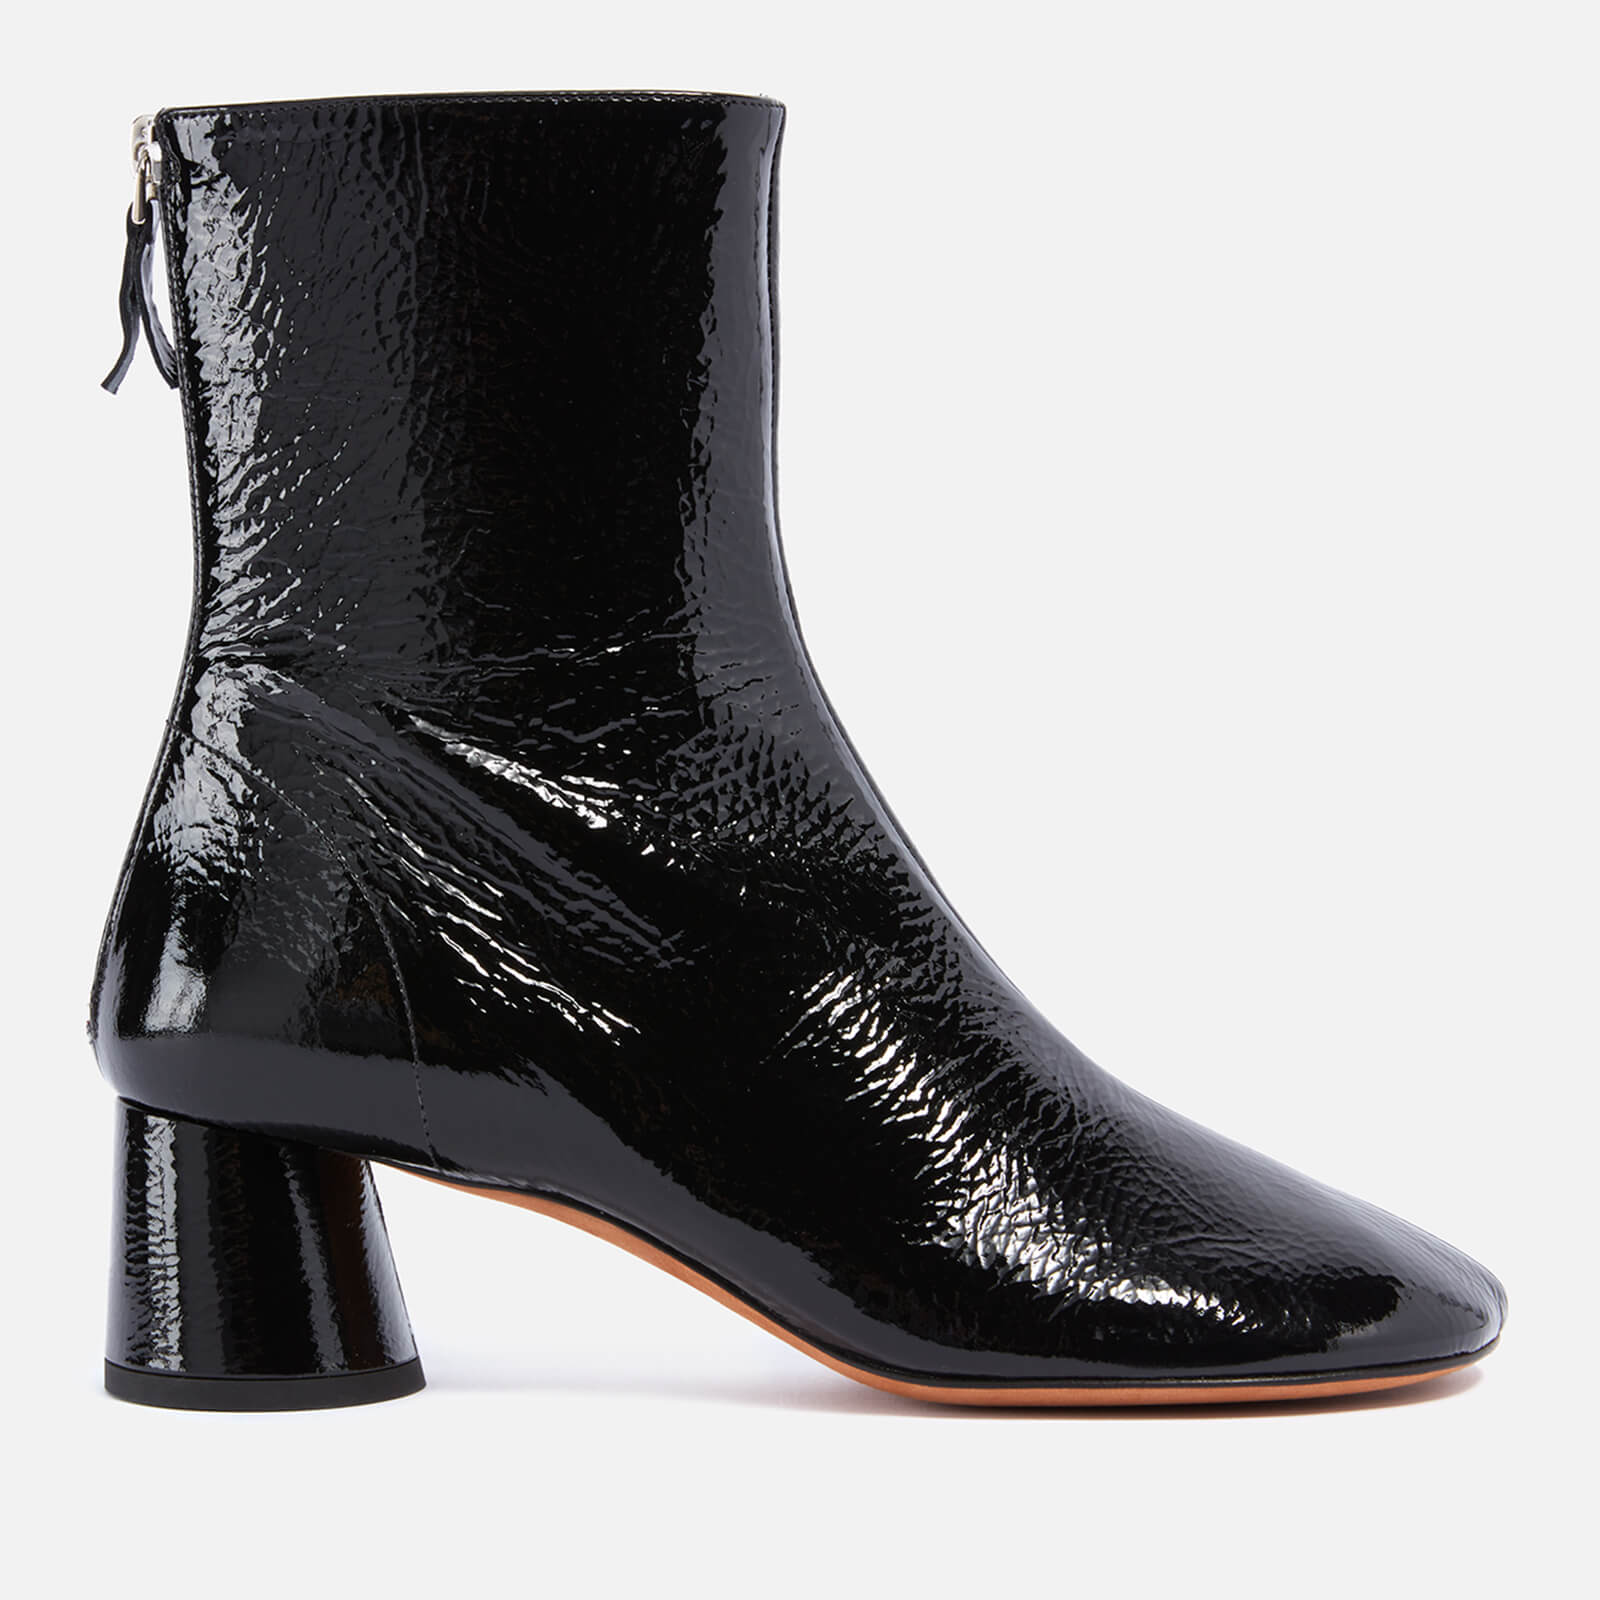 Proenza Schouler Crinkled Patent-Leather Heeled Ankle Boots - UK 3